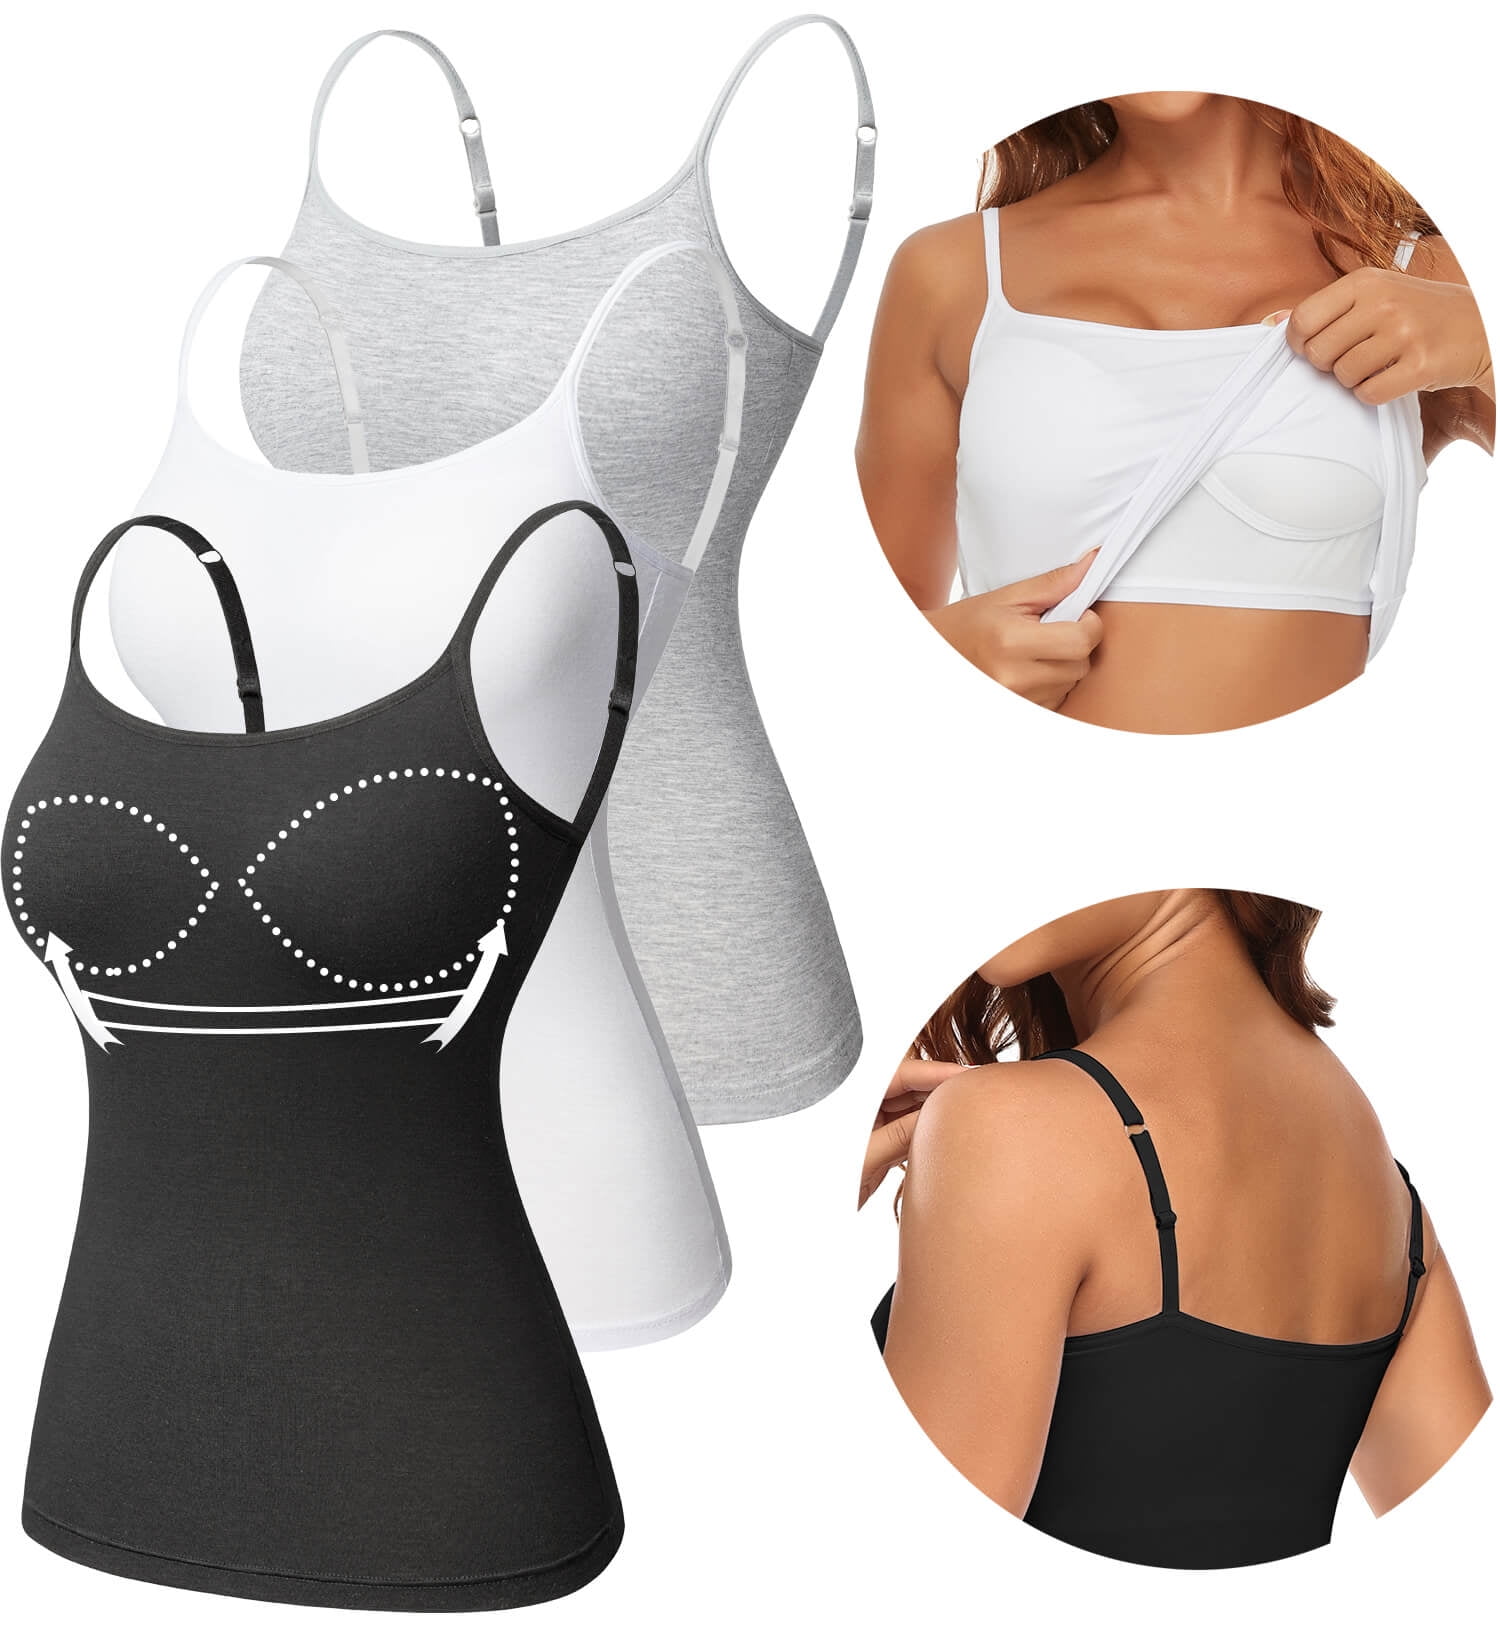 MANIFIQUE 3 Pack Women's Camisole with Built-in Padded Bra Adjustbale  Spaghetti Strap Tank Top Cami Comfort Undershirt 